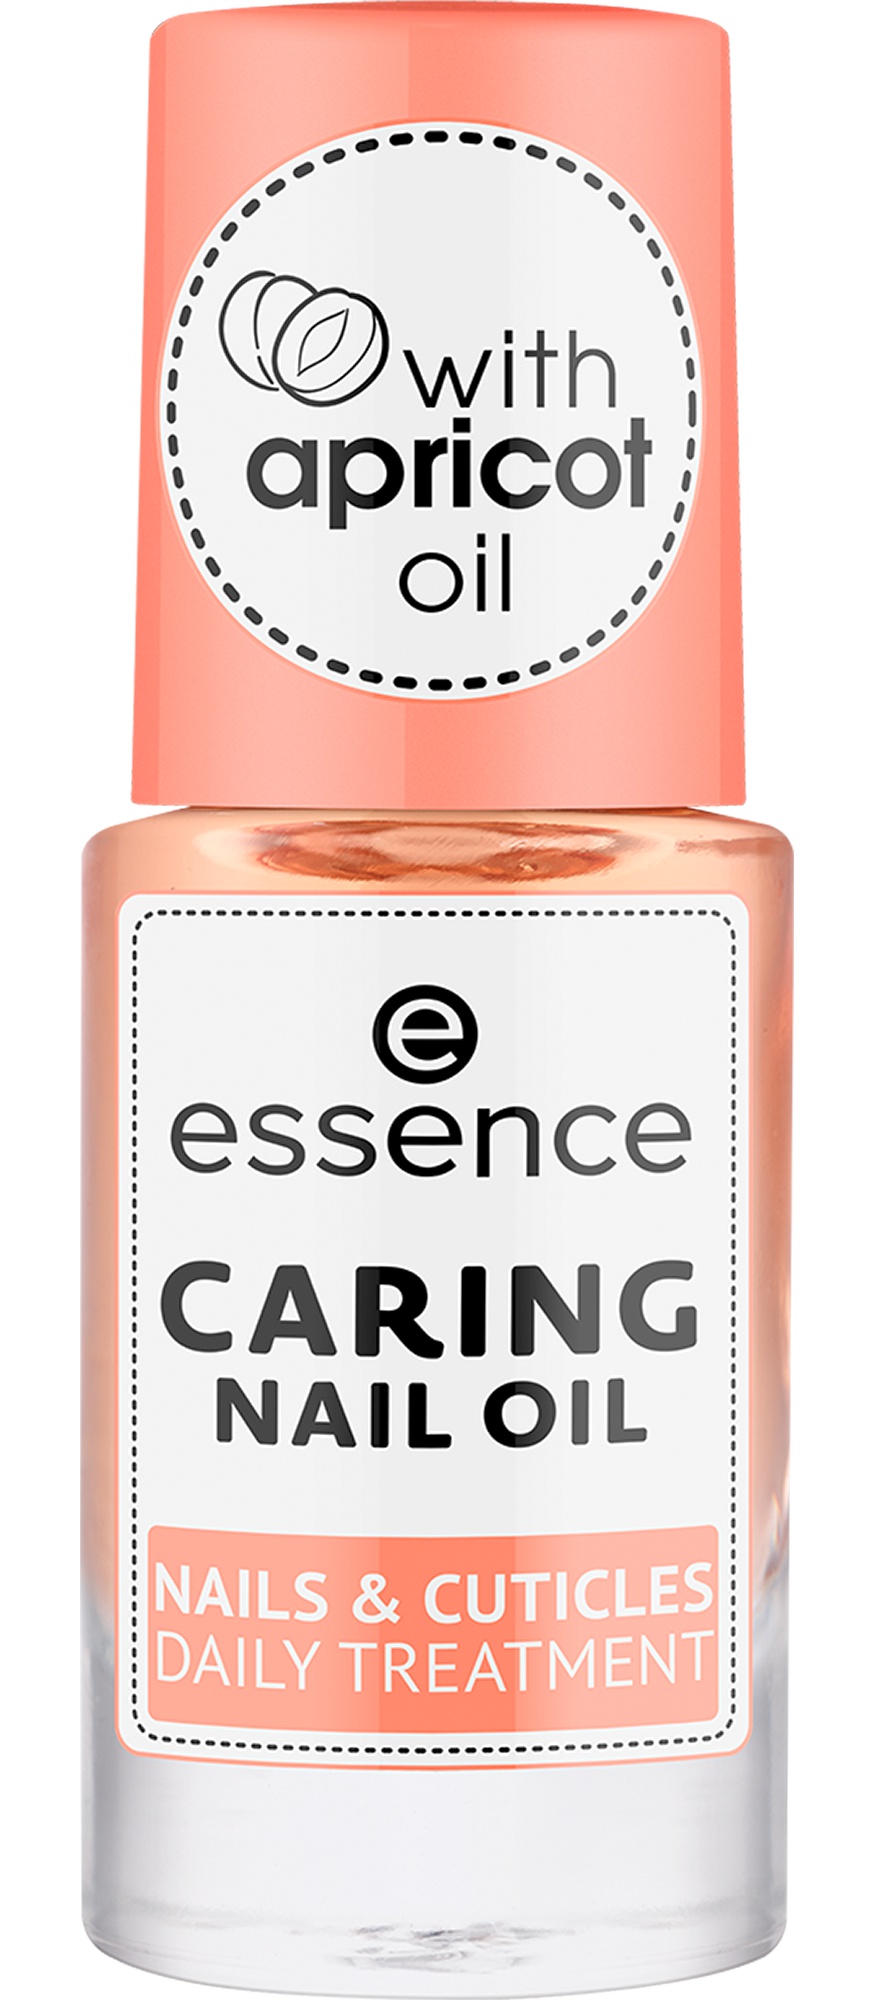 Essence Caring Nail Oil